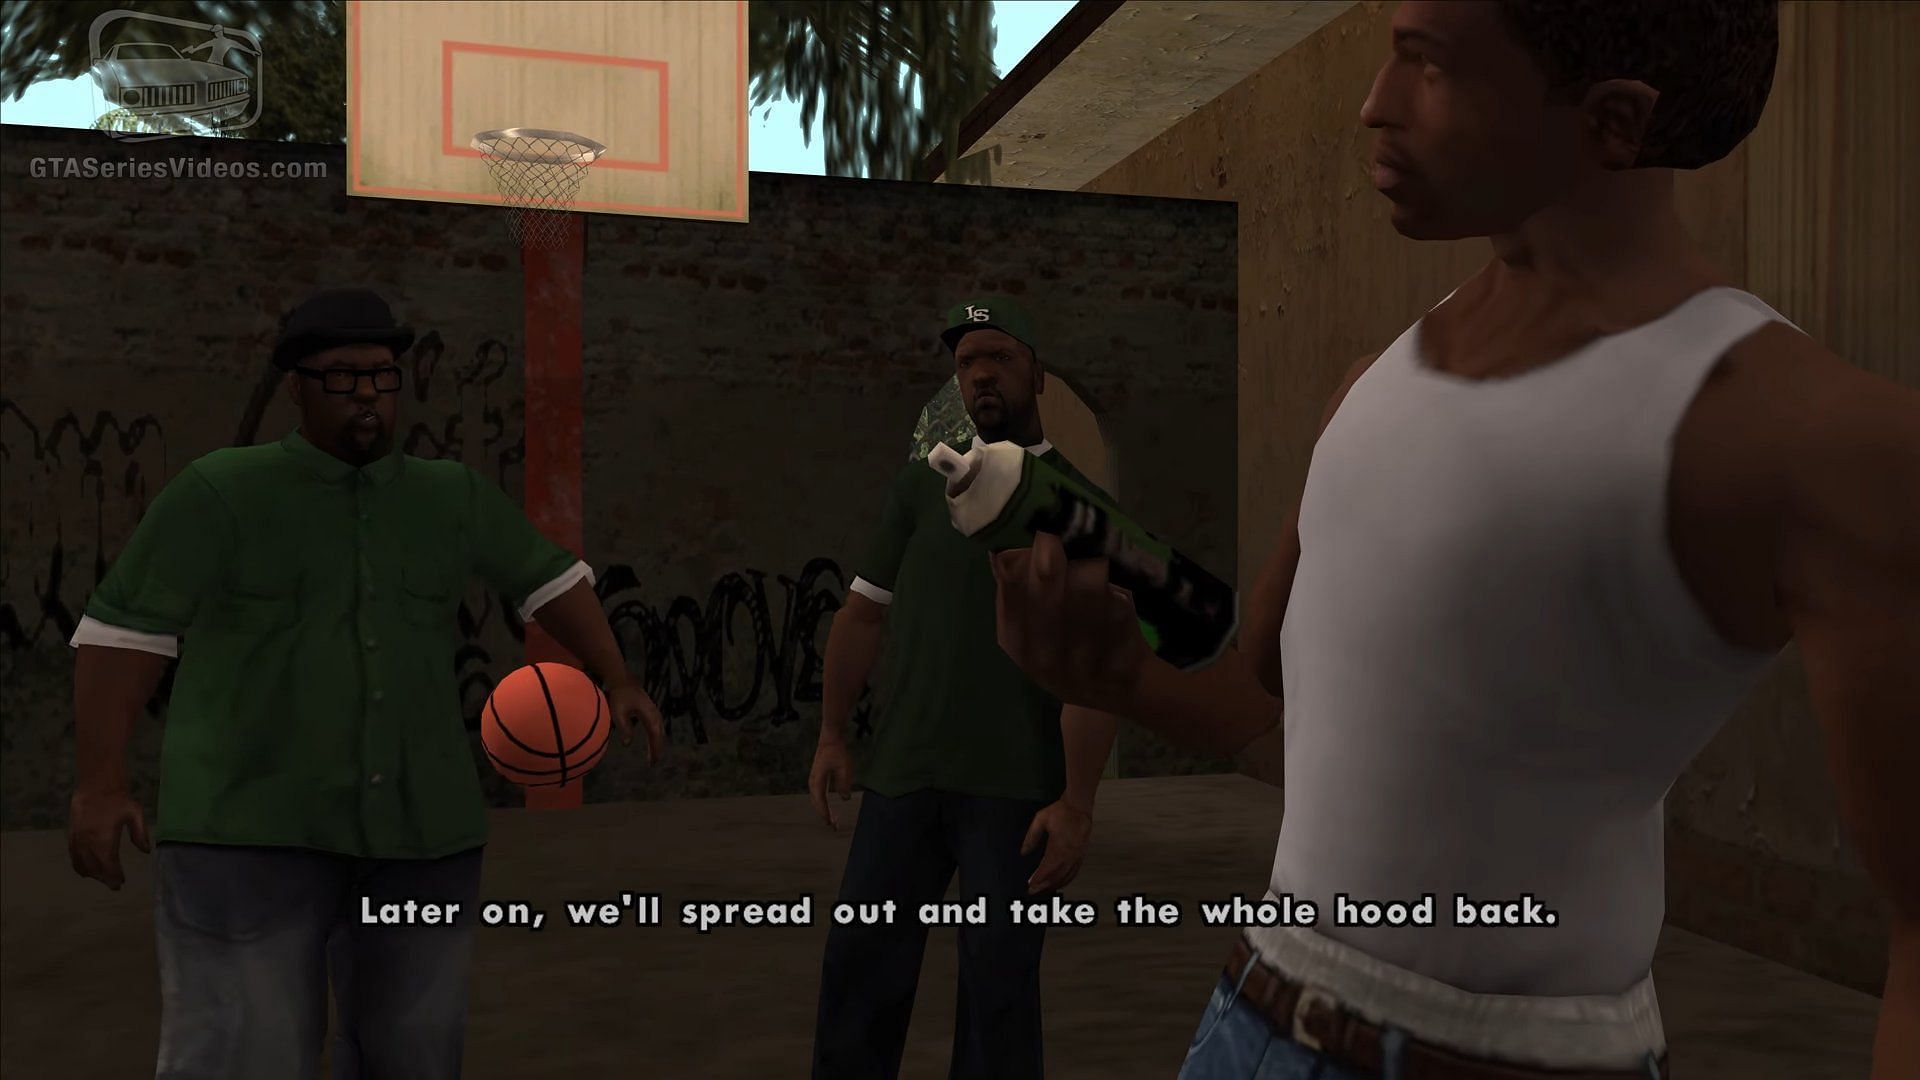 The characters are barely visible in this cutscene (Image via GTA Series Videos, YouTube)